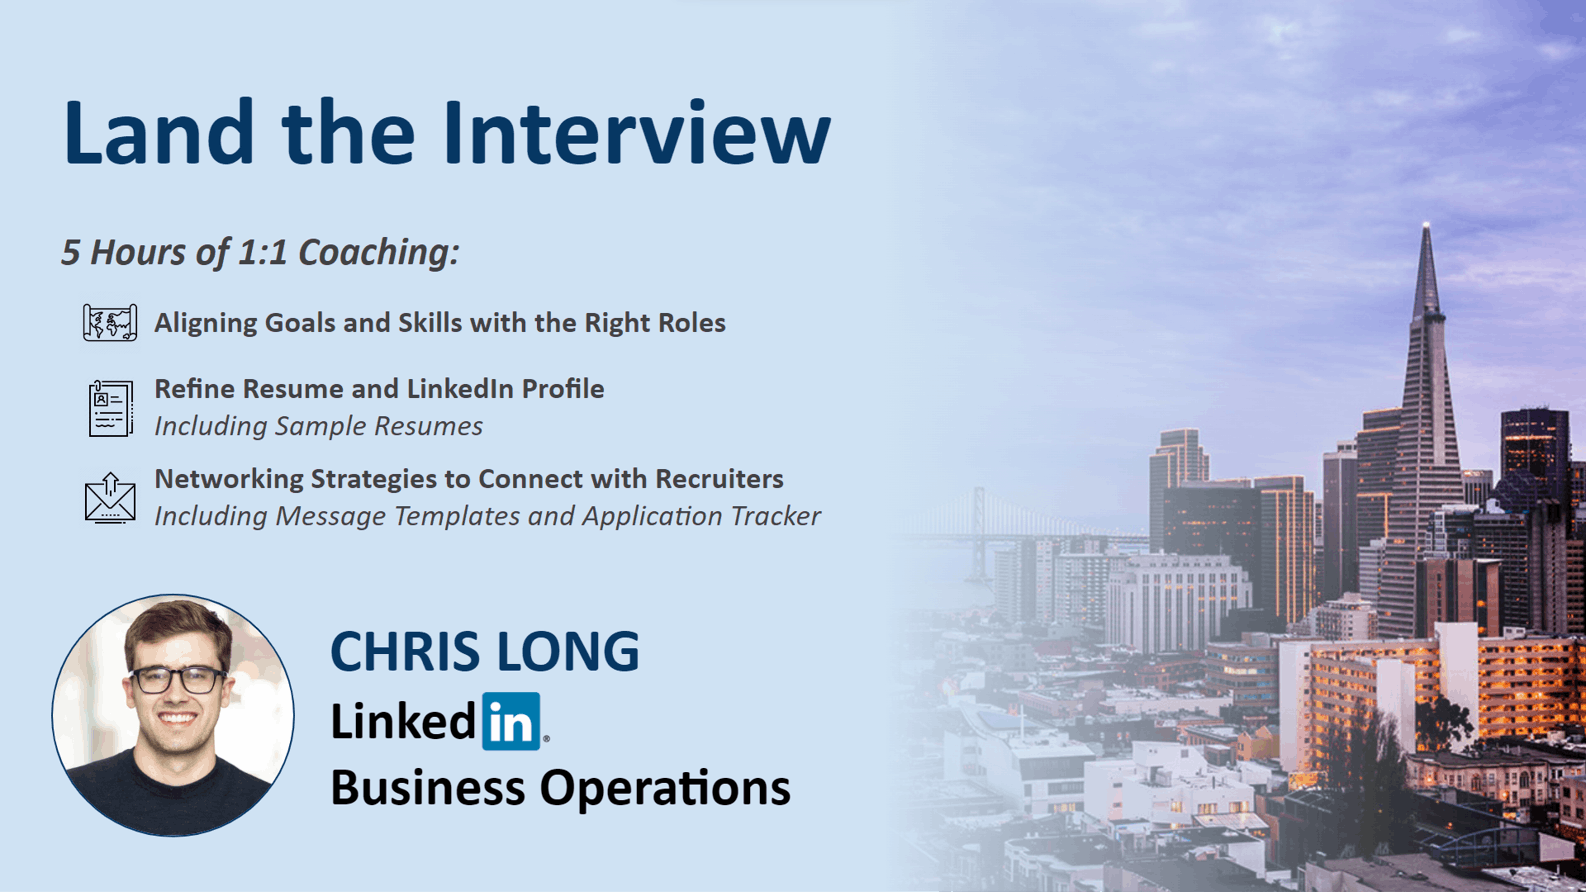 Land the Interview - Building a Top Application and Recruiting Strategy